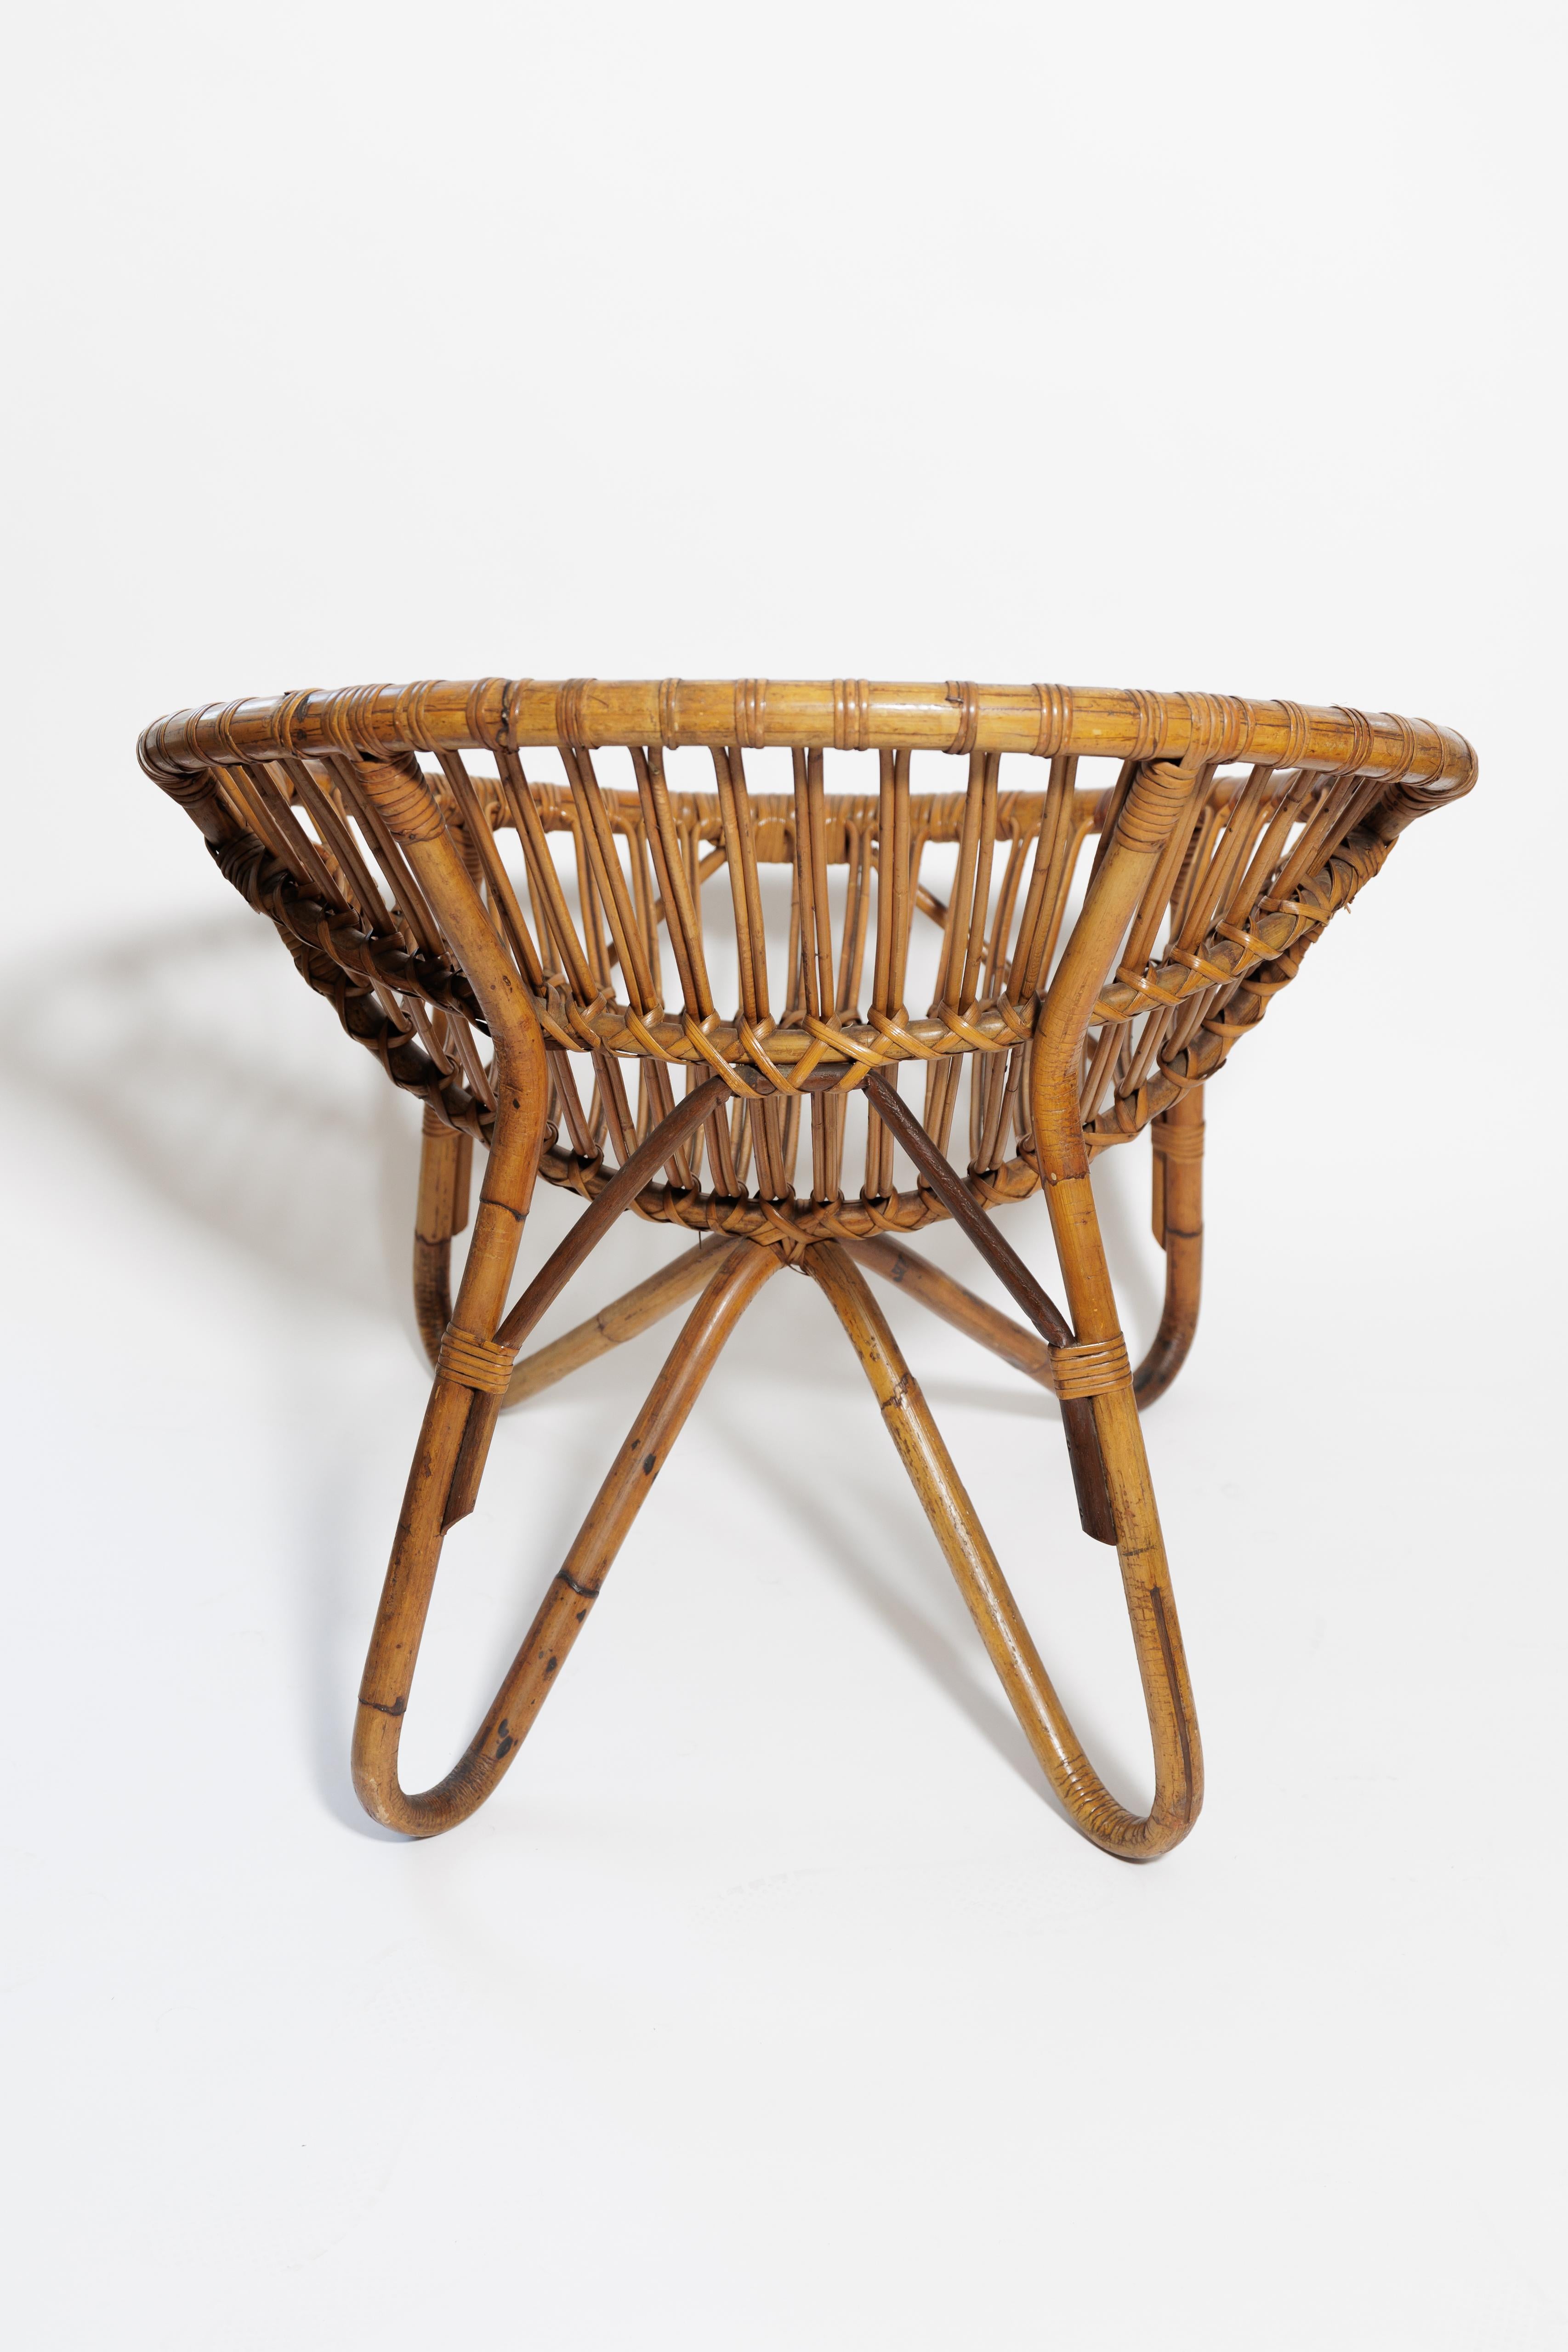 Hand-Crafted Pair of Petite Round Form Rattan Chairs For Sale